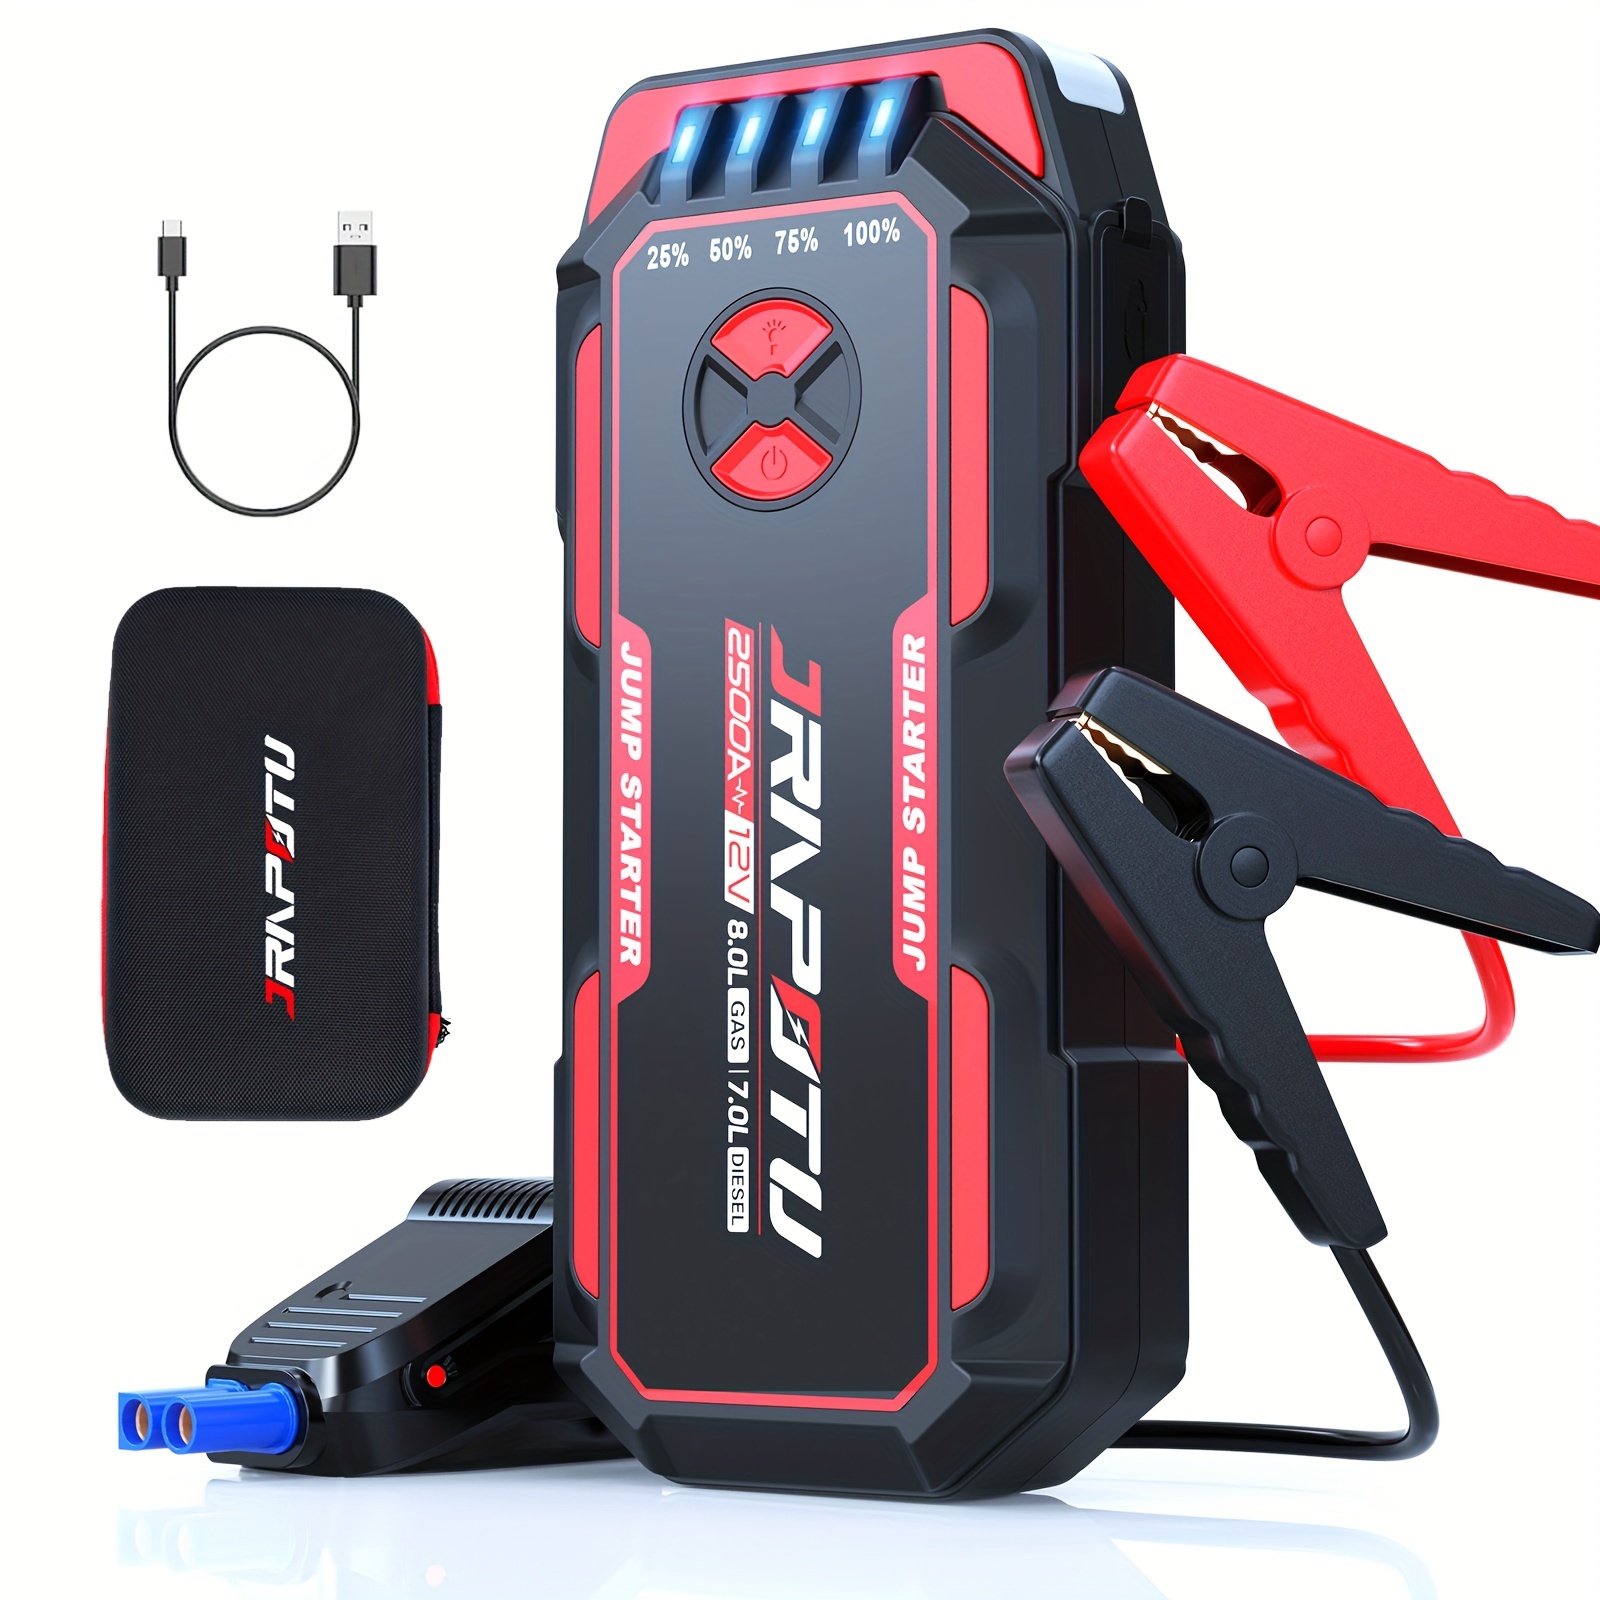 

Car Battery Jump Starter 2500a Jump Box (8.0l Gas/7.0l ) Portable Car Pack, 12v Car Battery Jumper Starter With Safety Jumper Cables, Fast Charge, Lights, Compact